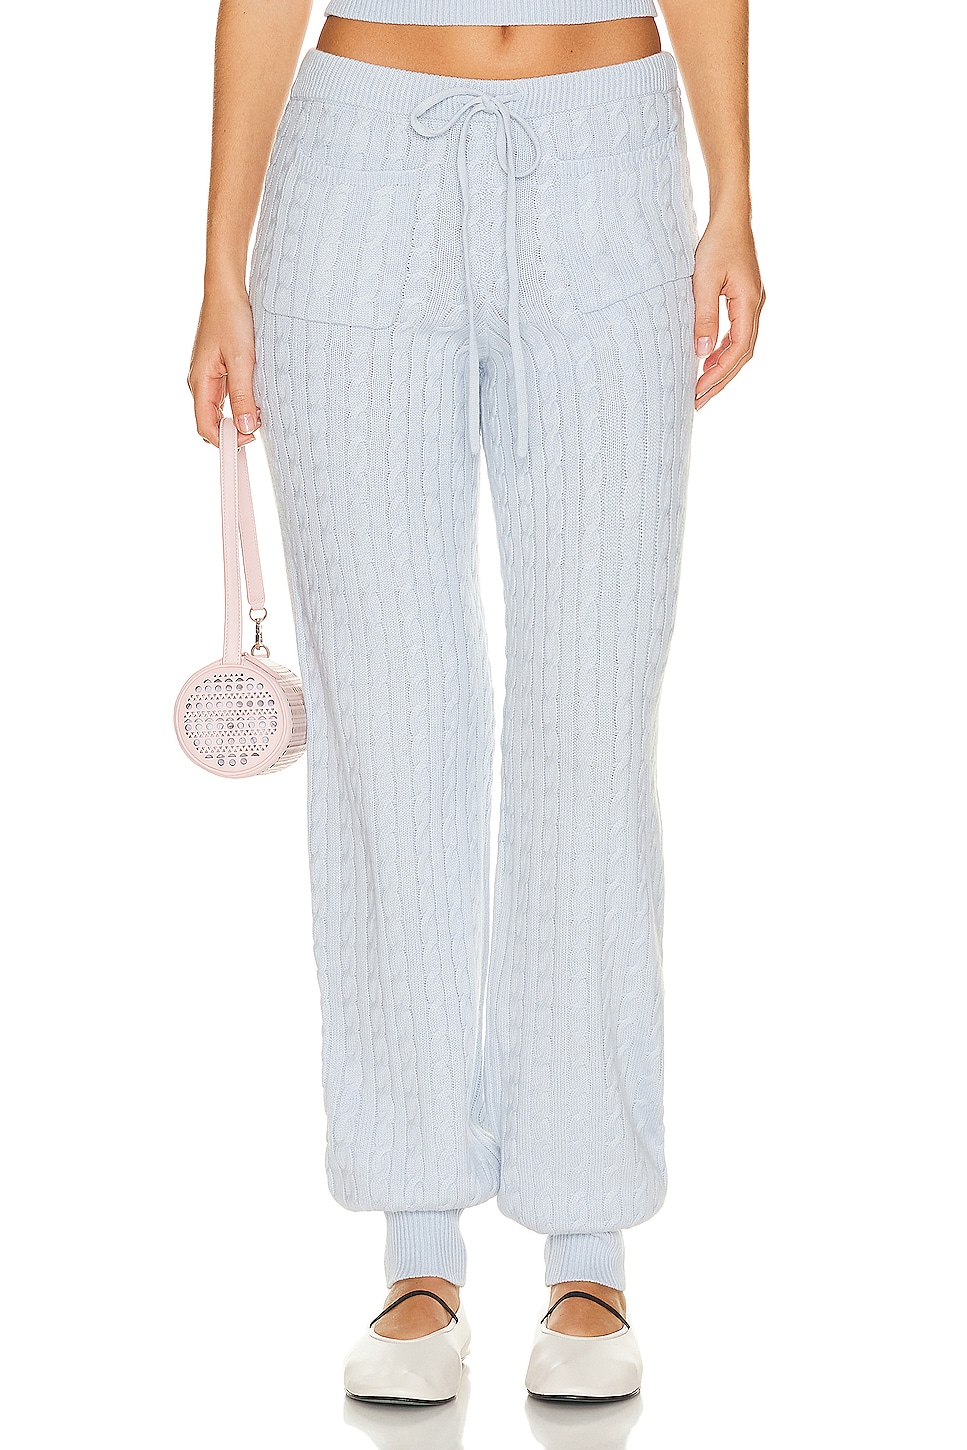 Image 1 of Helsa Taiki Cable Pants in Pale Blue